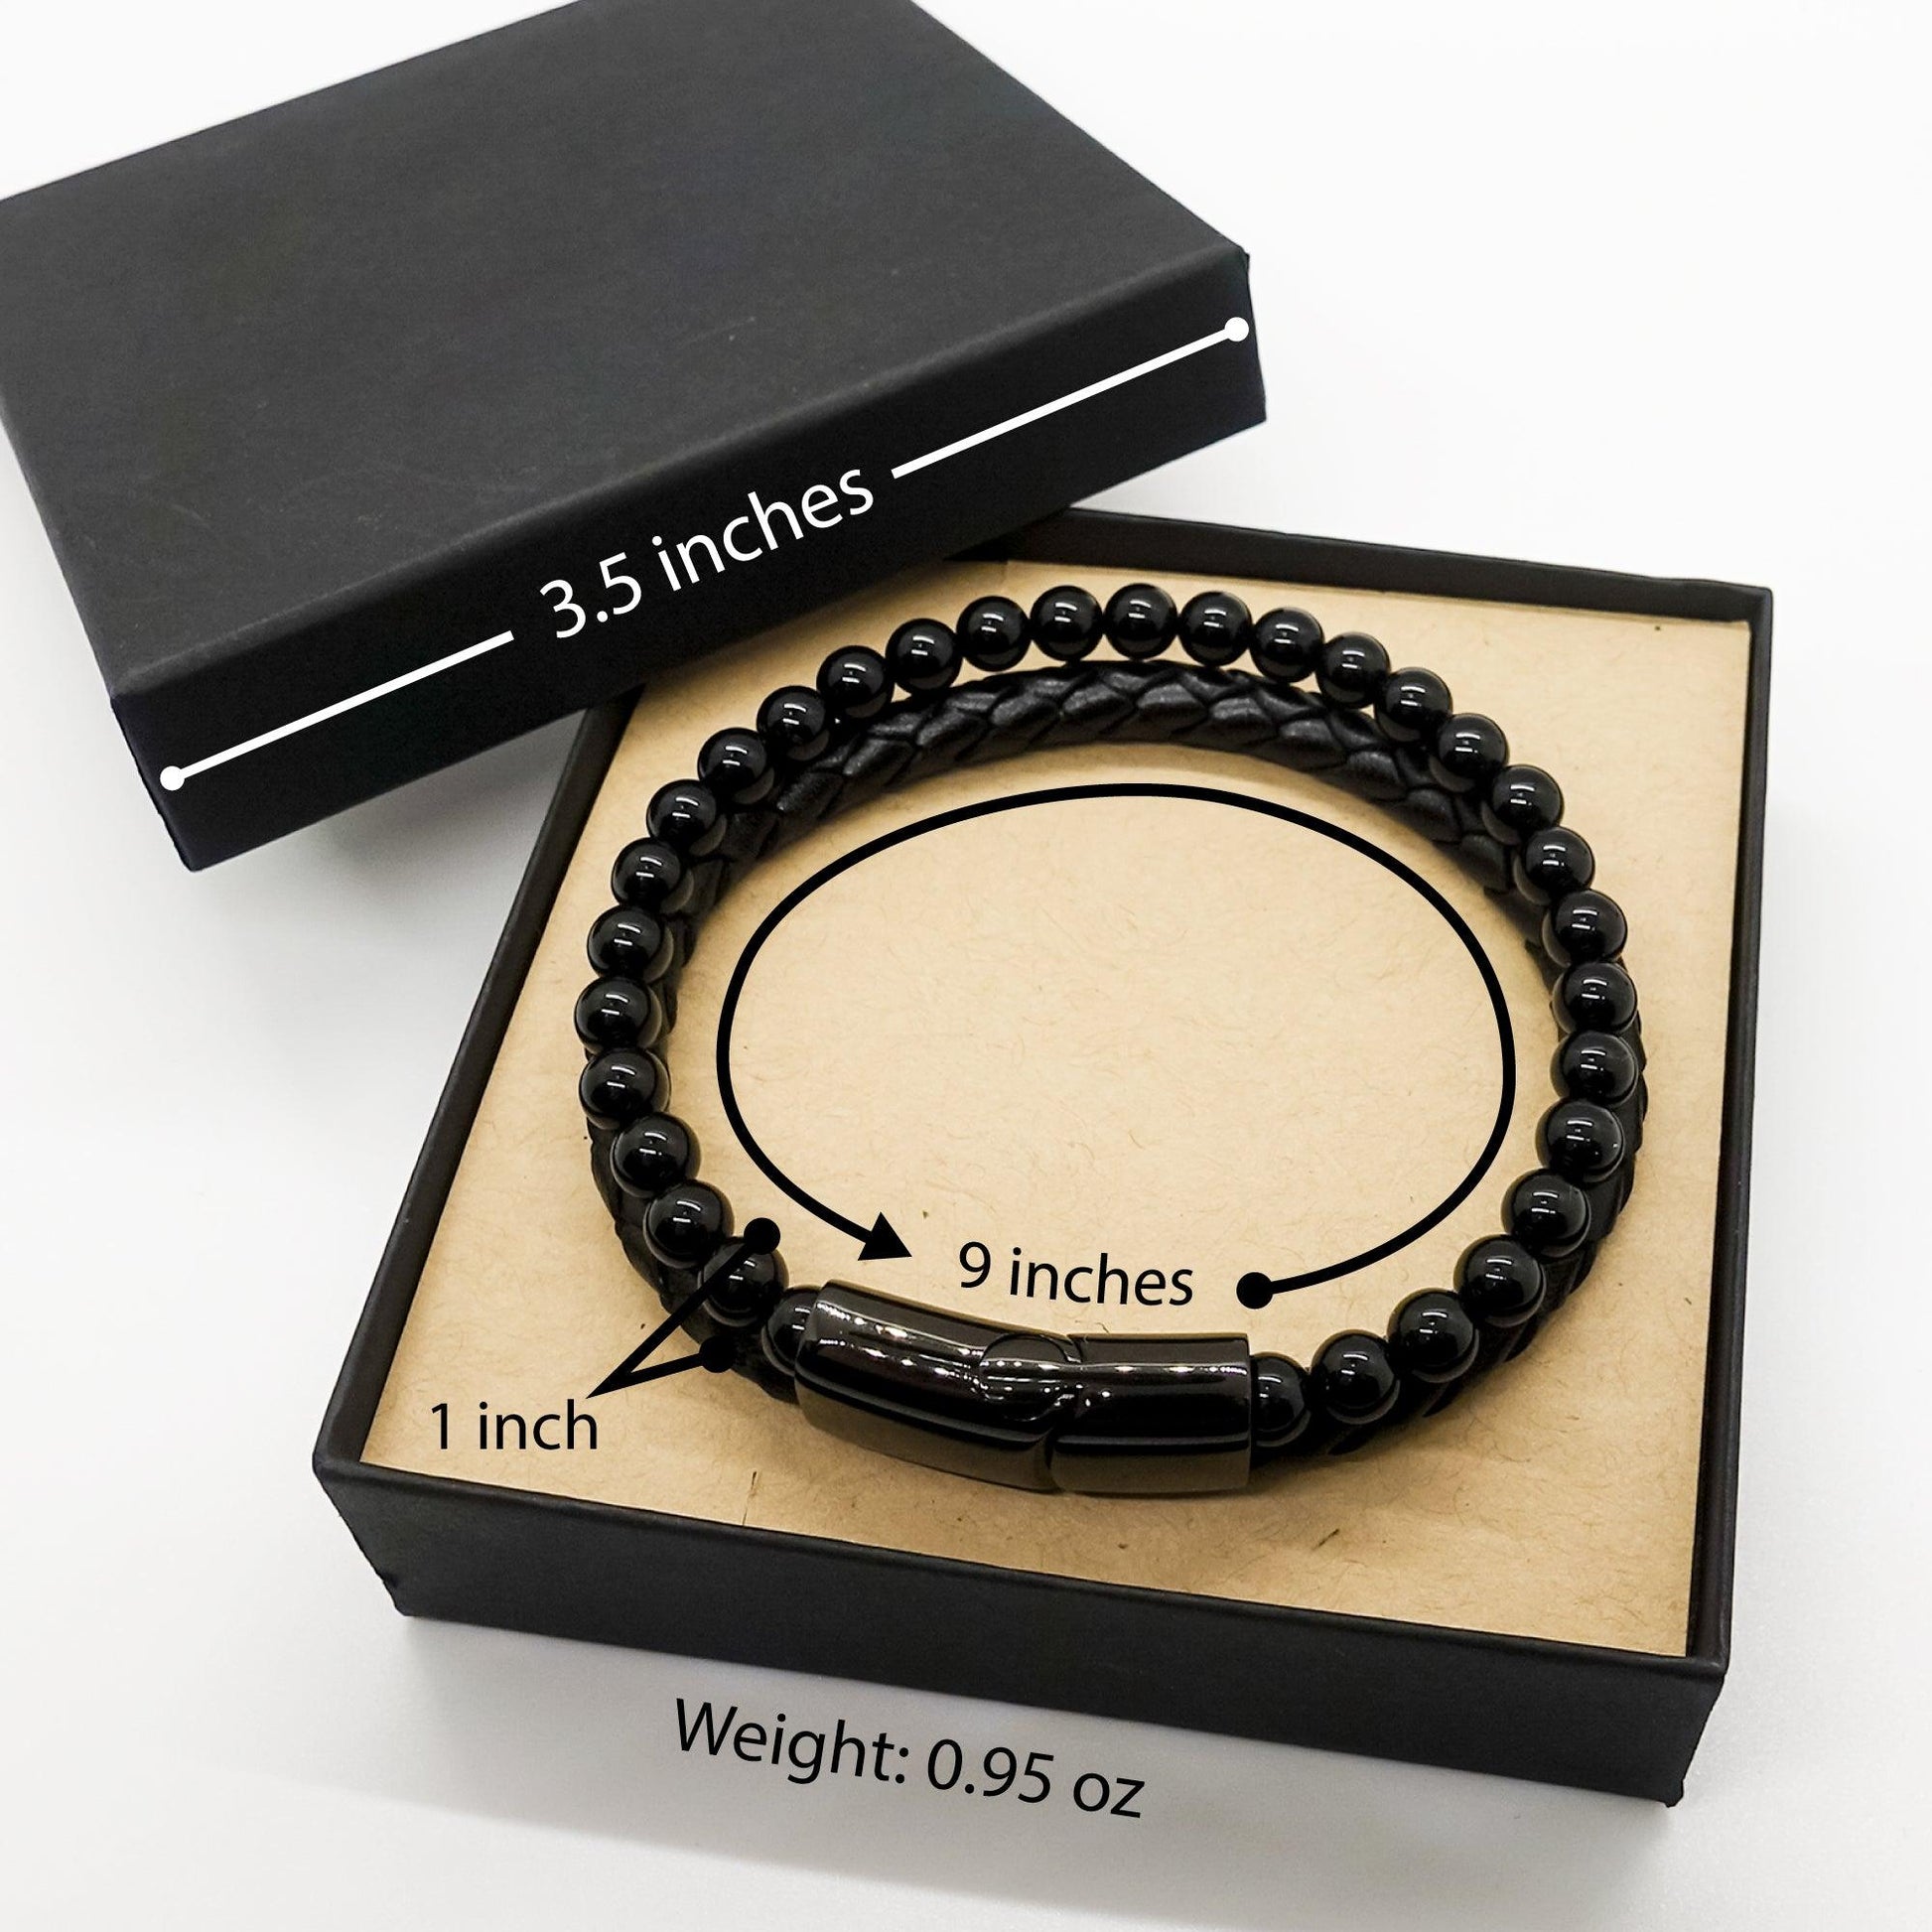 Computer Programmer Black Braided Stone Leather Bracelet - Thanks for being who you are - Birthday Christmas Jewelry Gifts Coworkers Colleague Boss - Mallard Moon Gift Shop